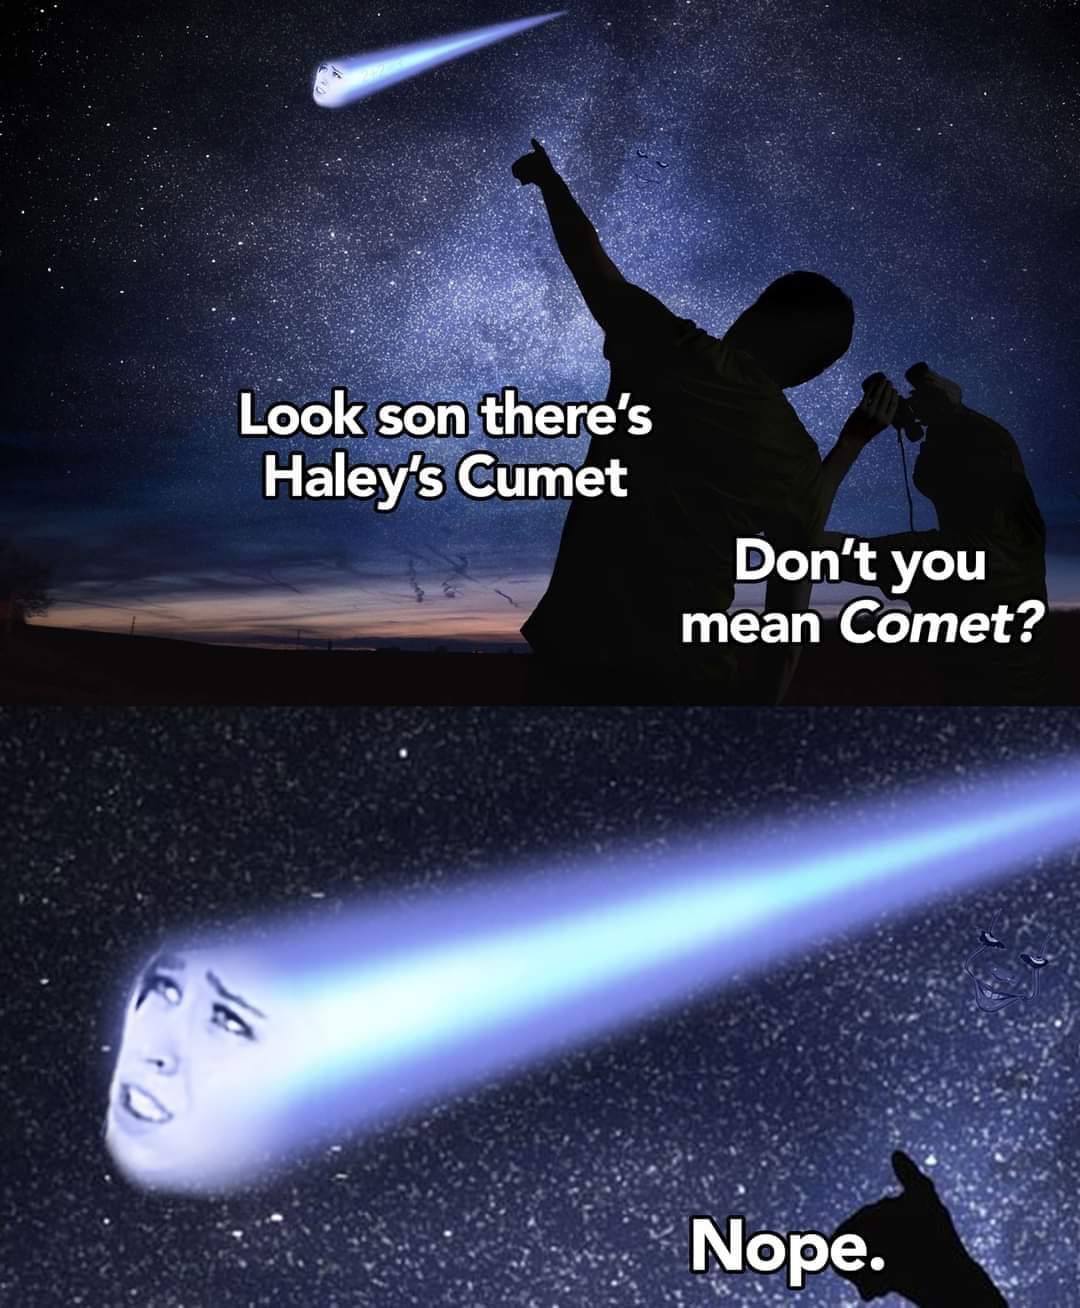 nsfw memes - astronomy stock - Look son there's Haley's Cumet Don't you mean Comet? Nope.